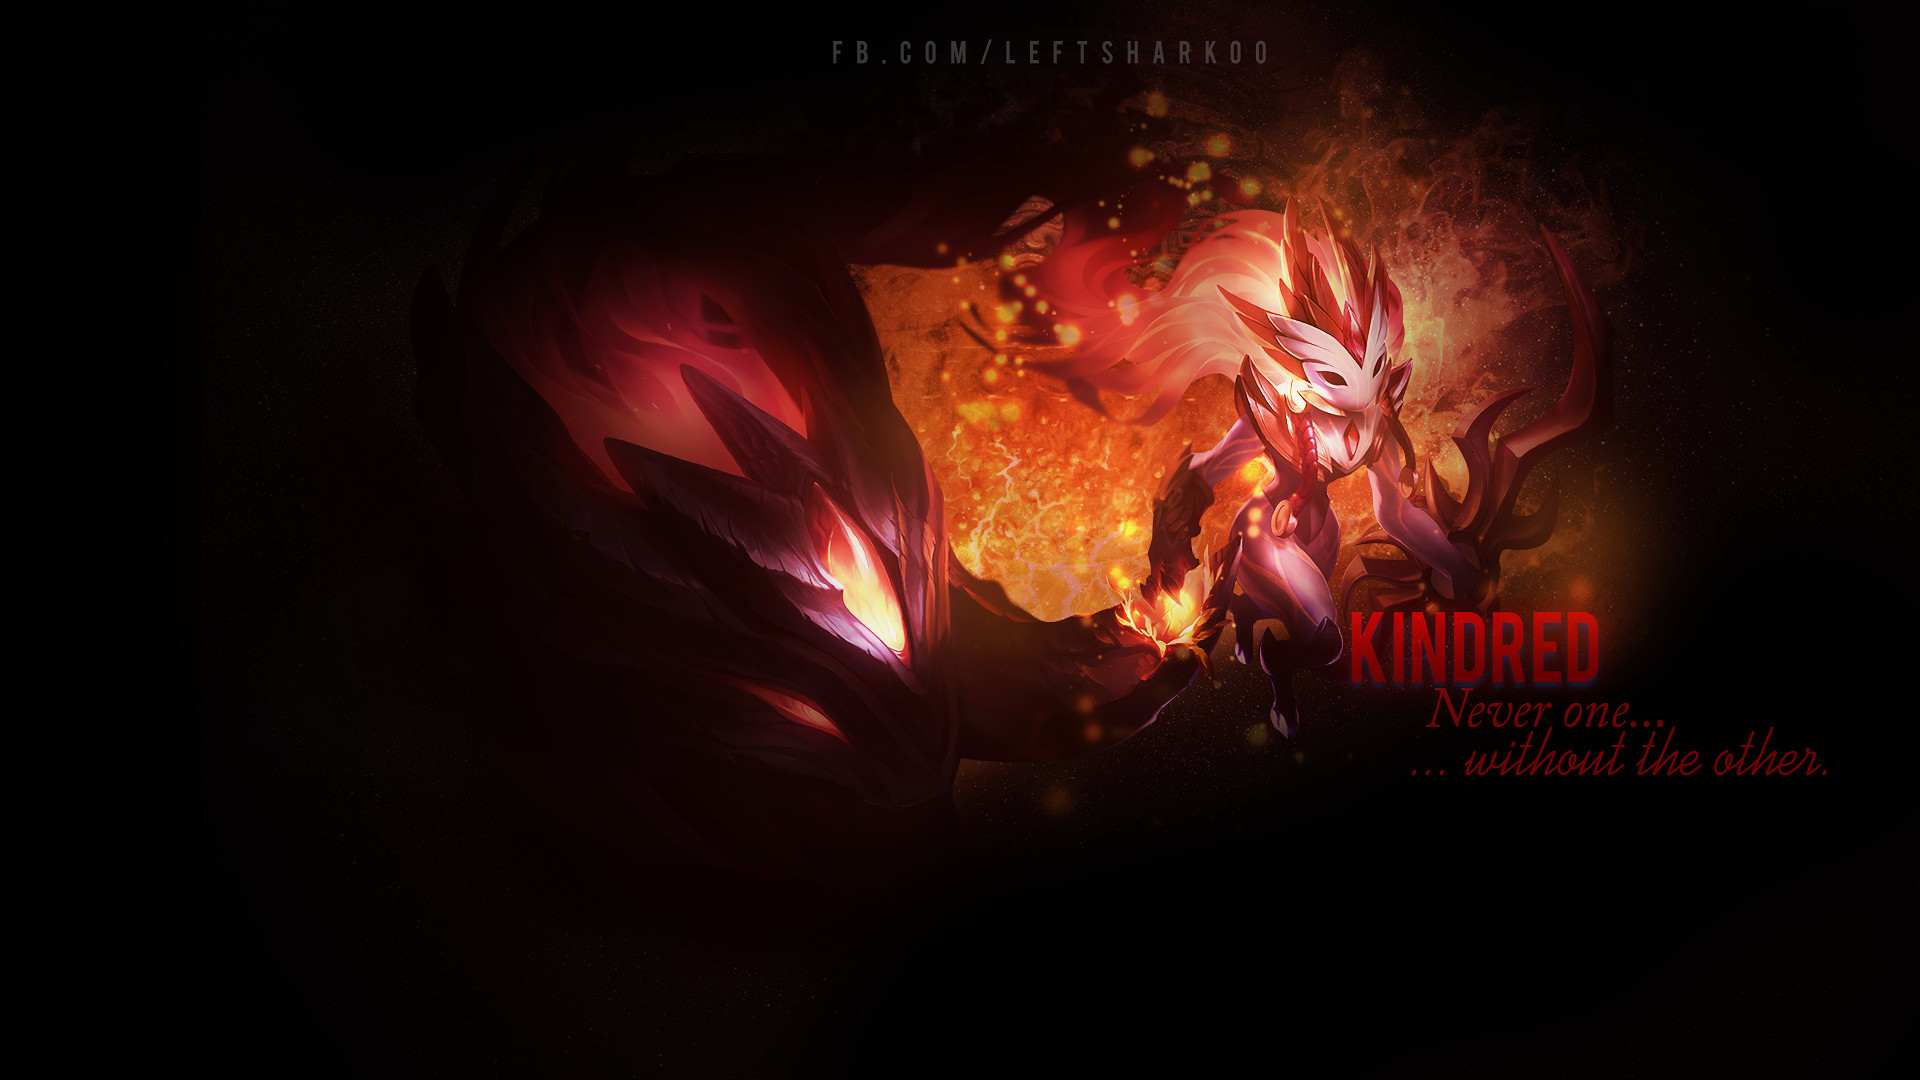 … Kindred wallpaper League of Legends by LeftLucy